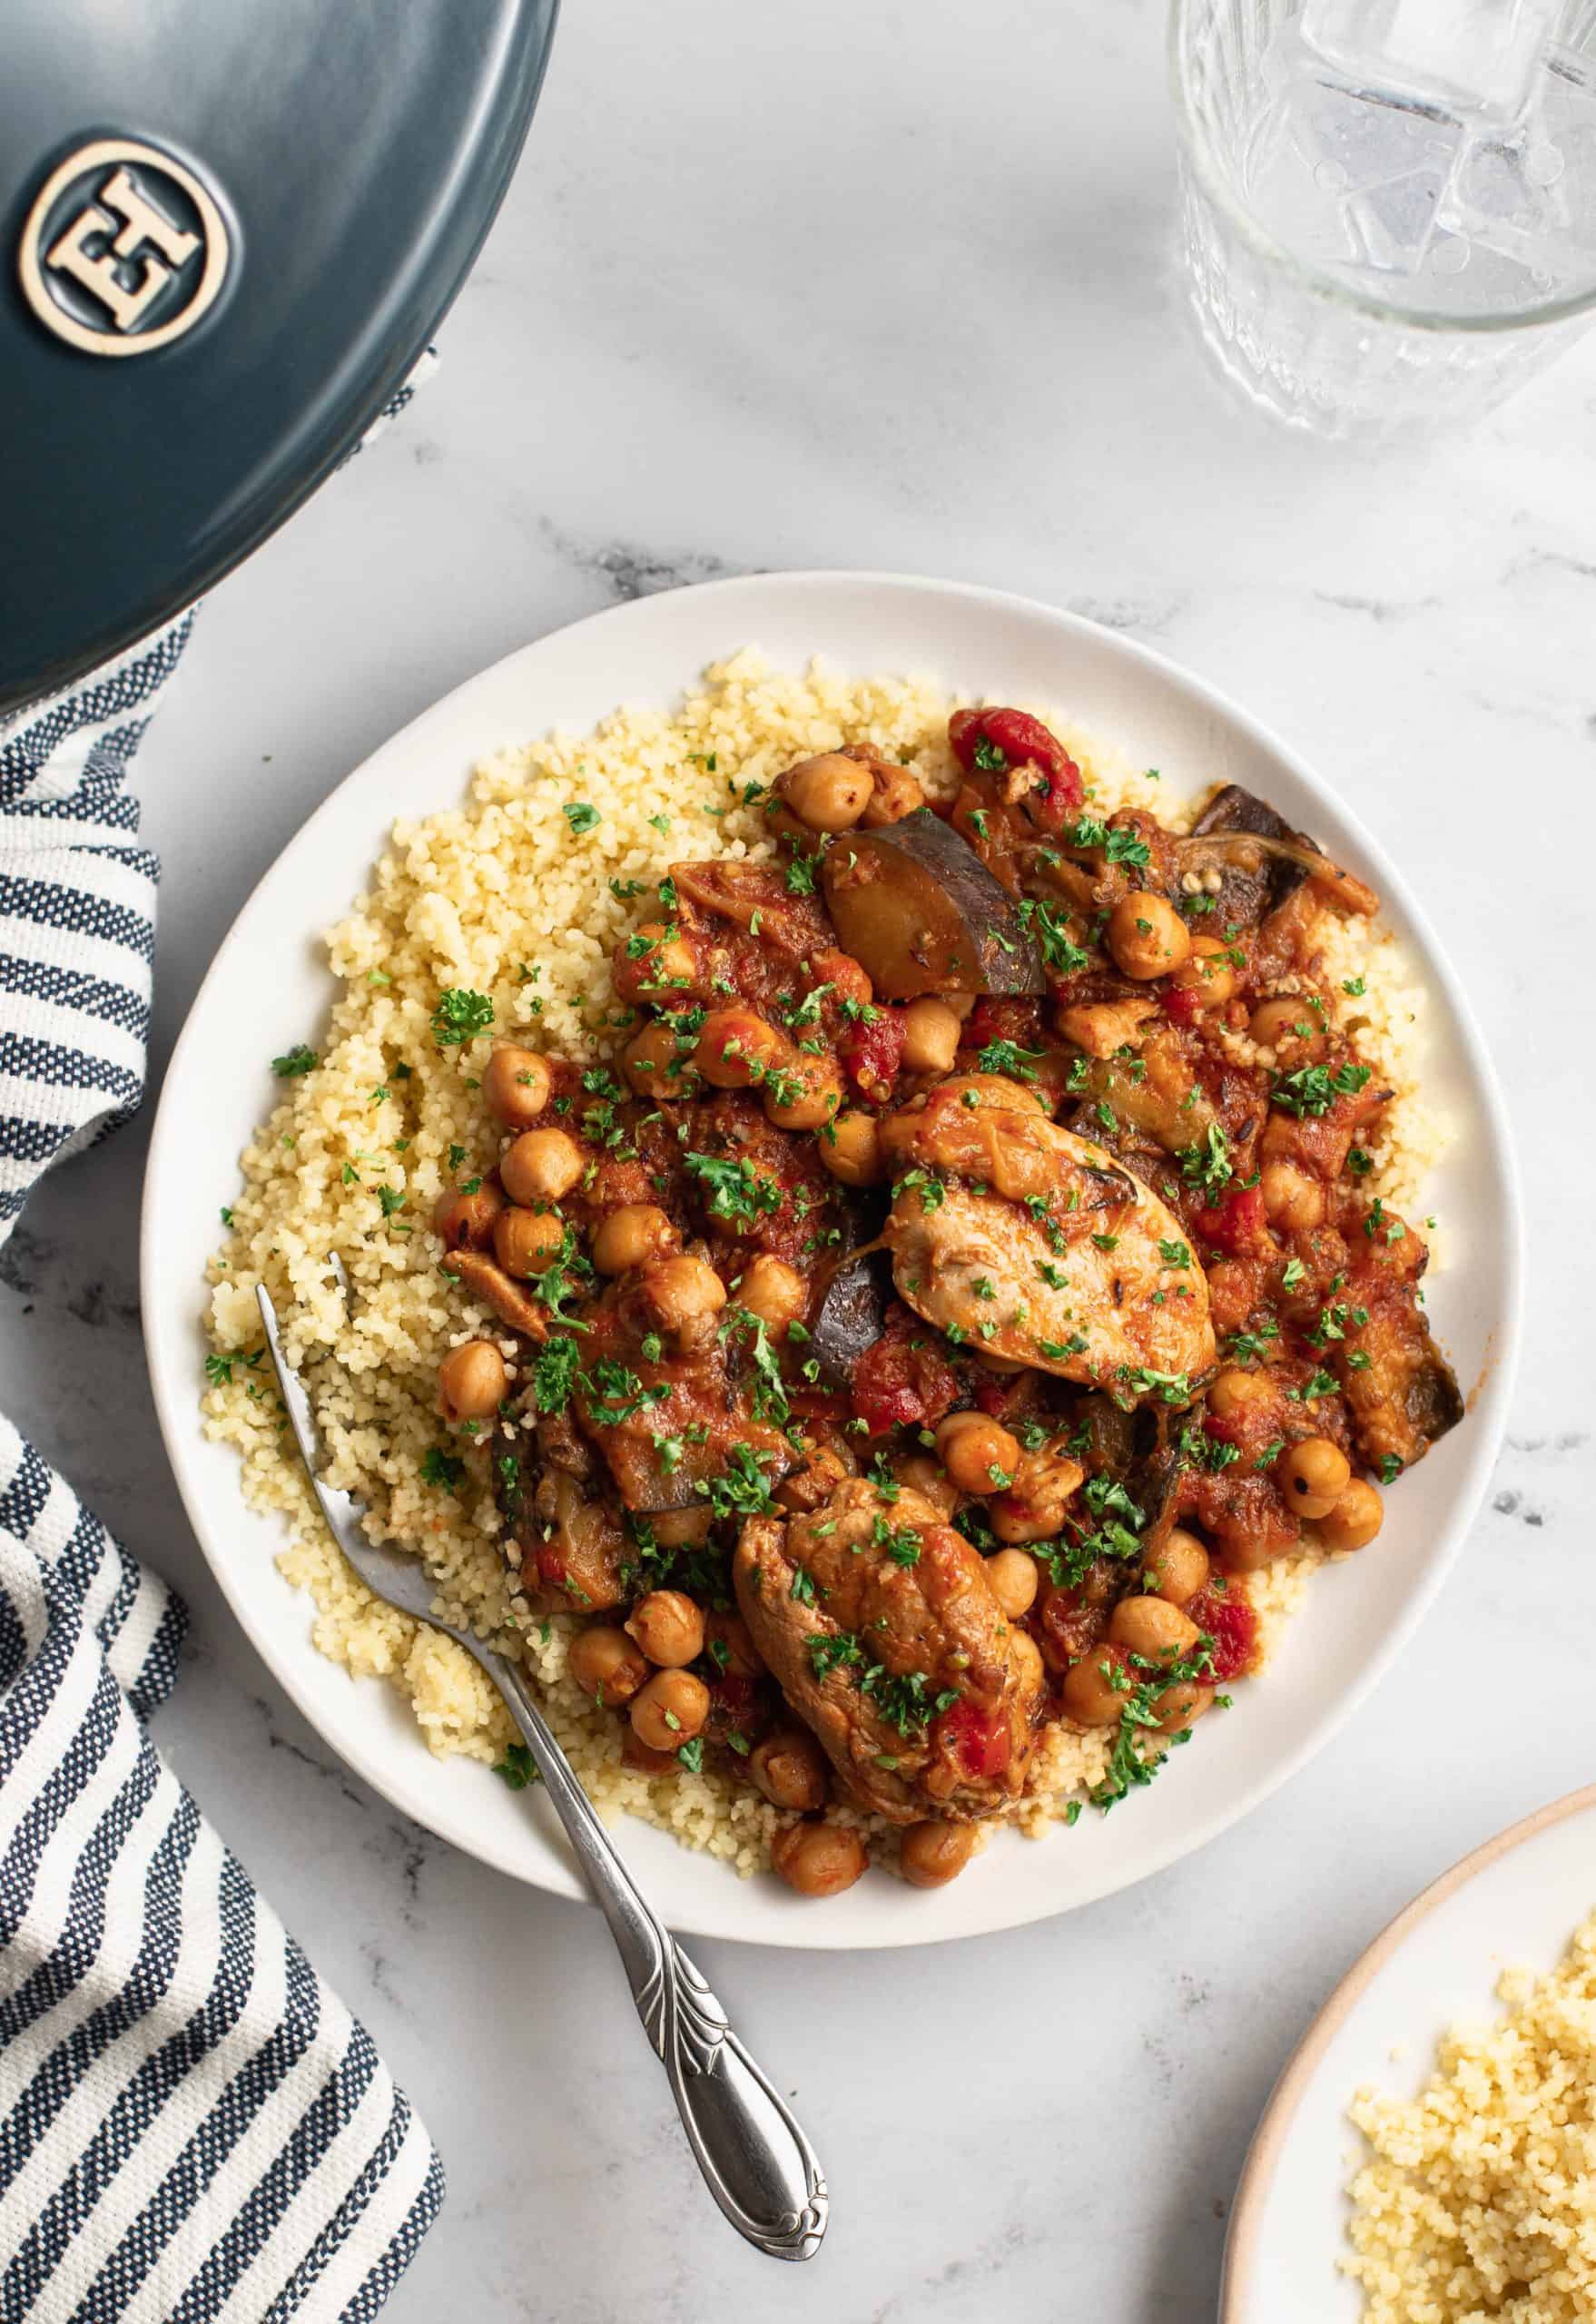 Chicken and eggplant tagine